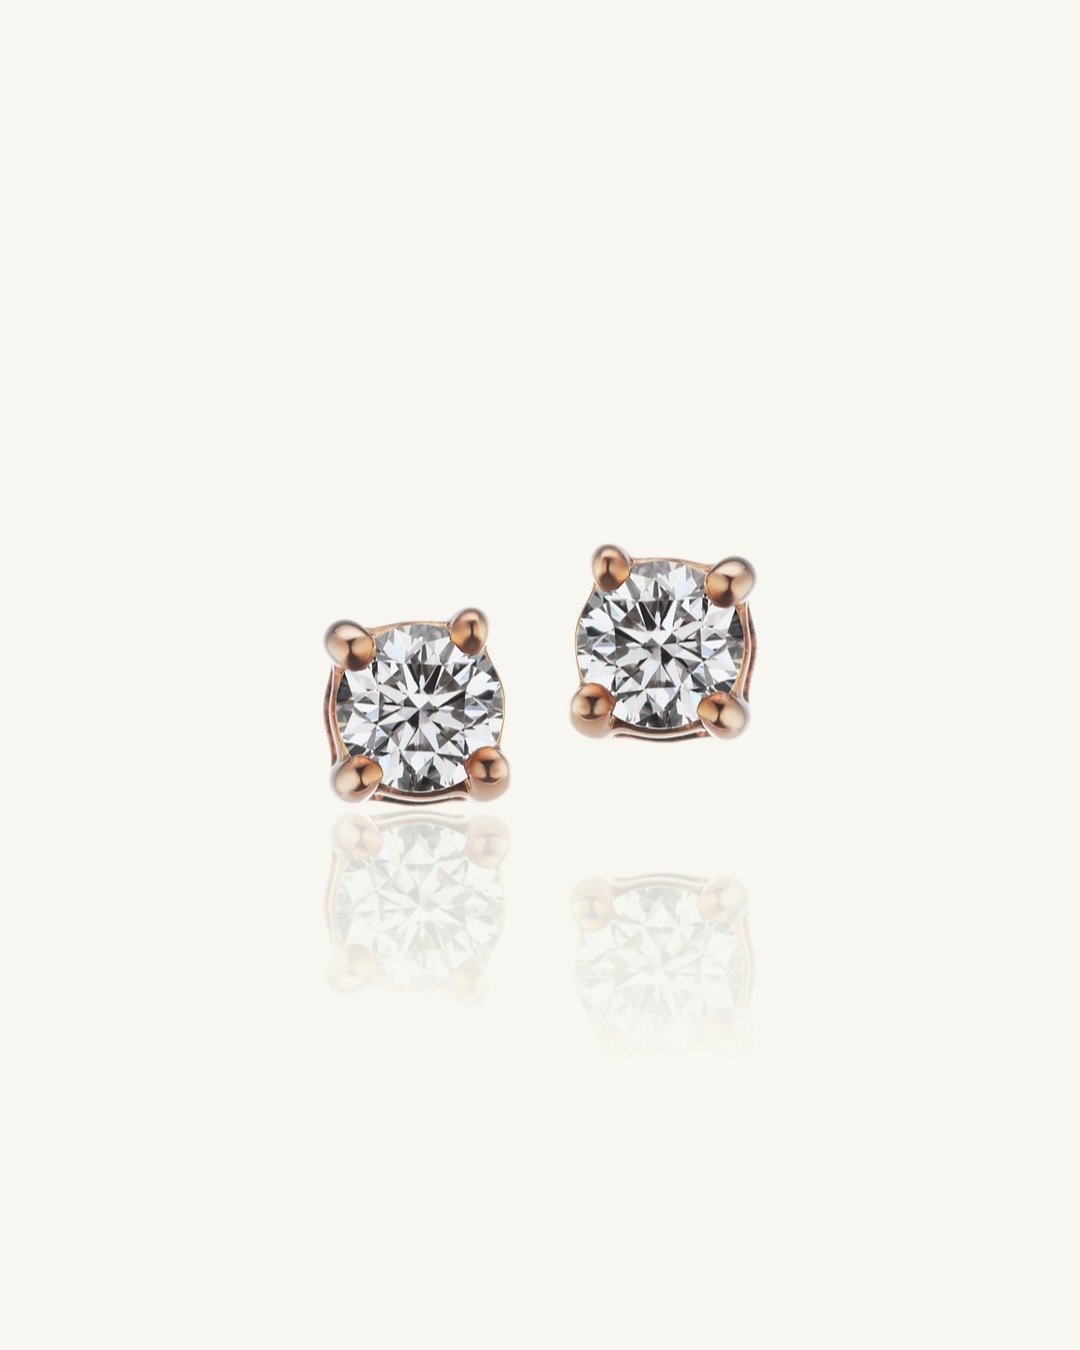 14K Yellow Gold Classic Solitaire Stud Earrings 3mm